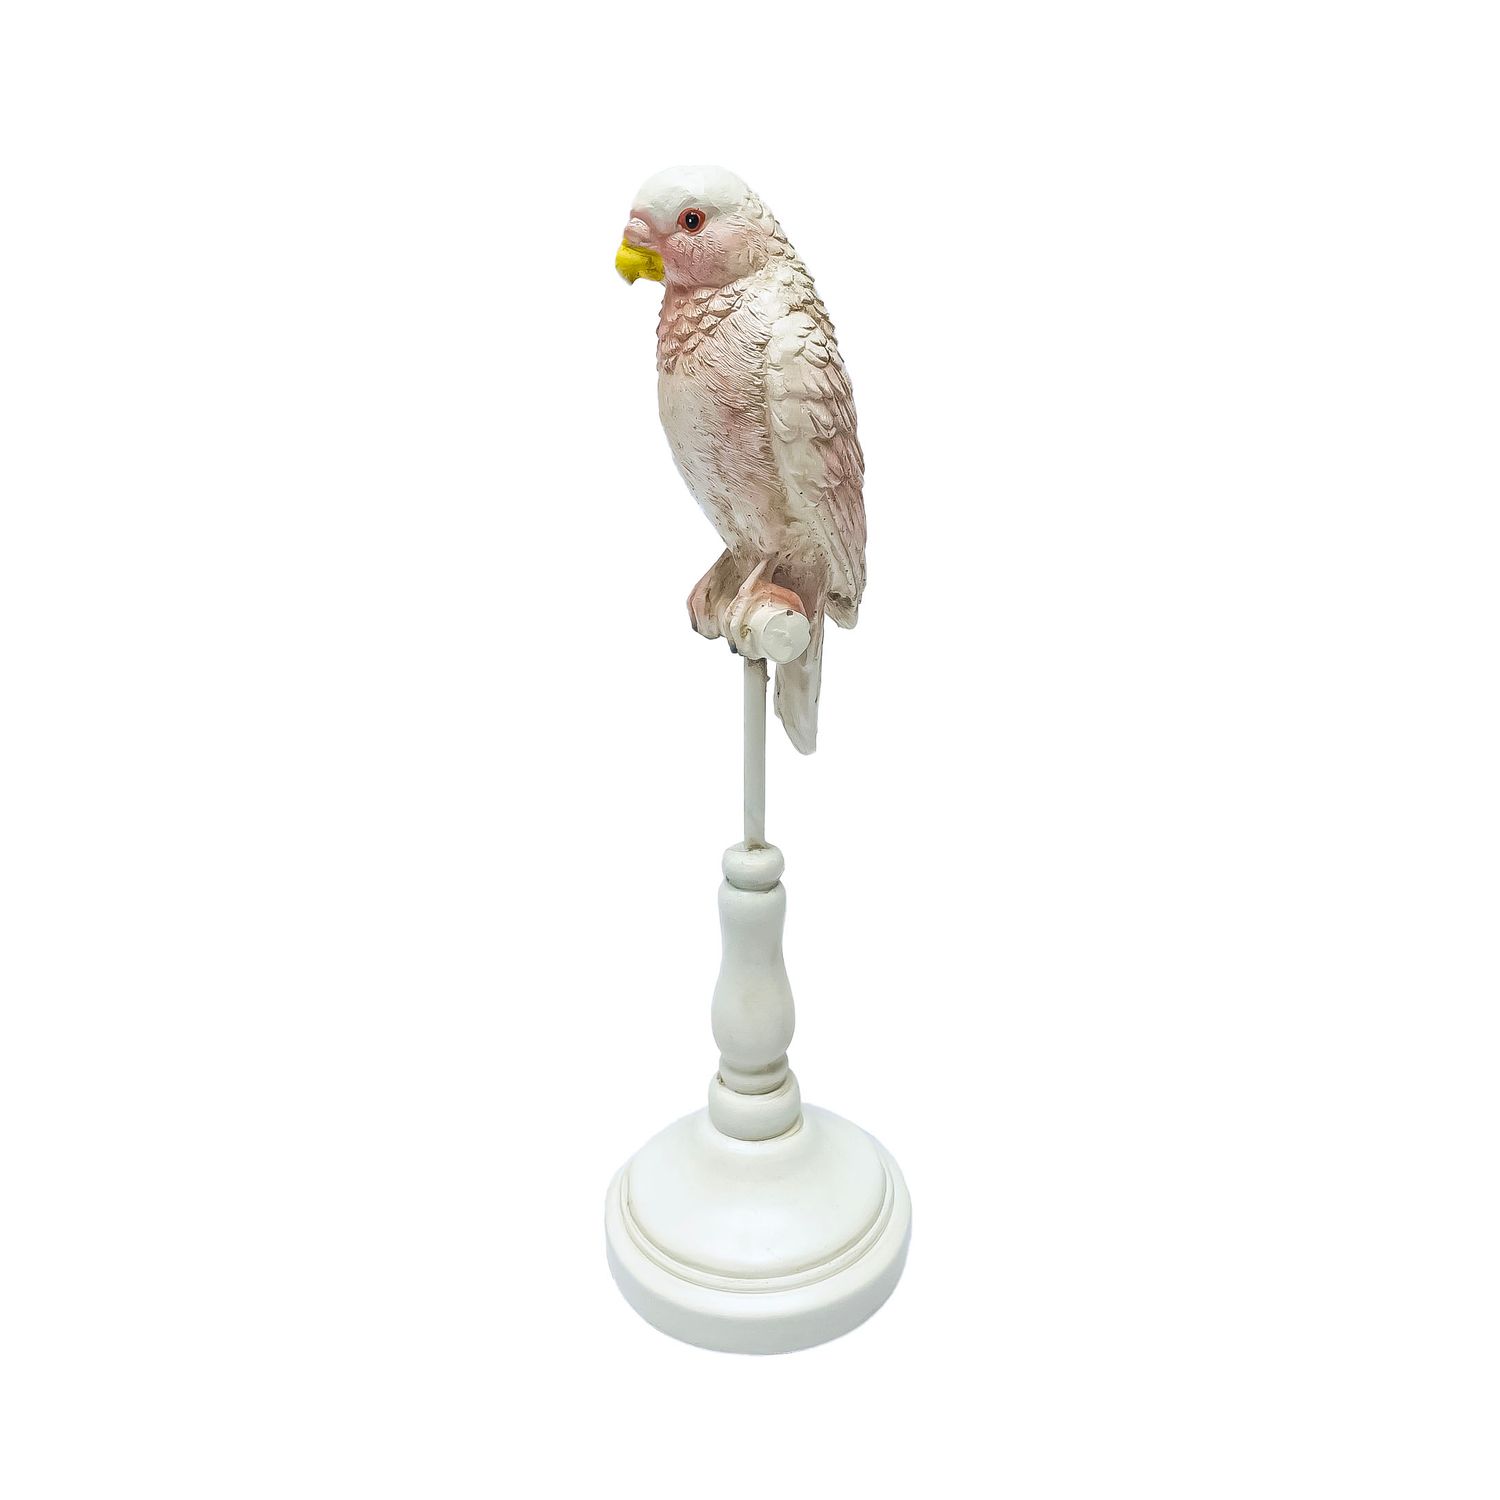 One Ceramic Budgie On Stand